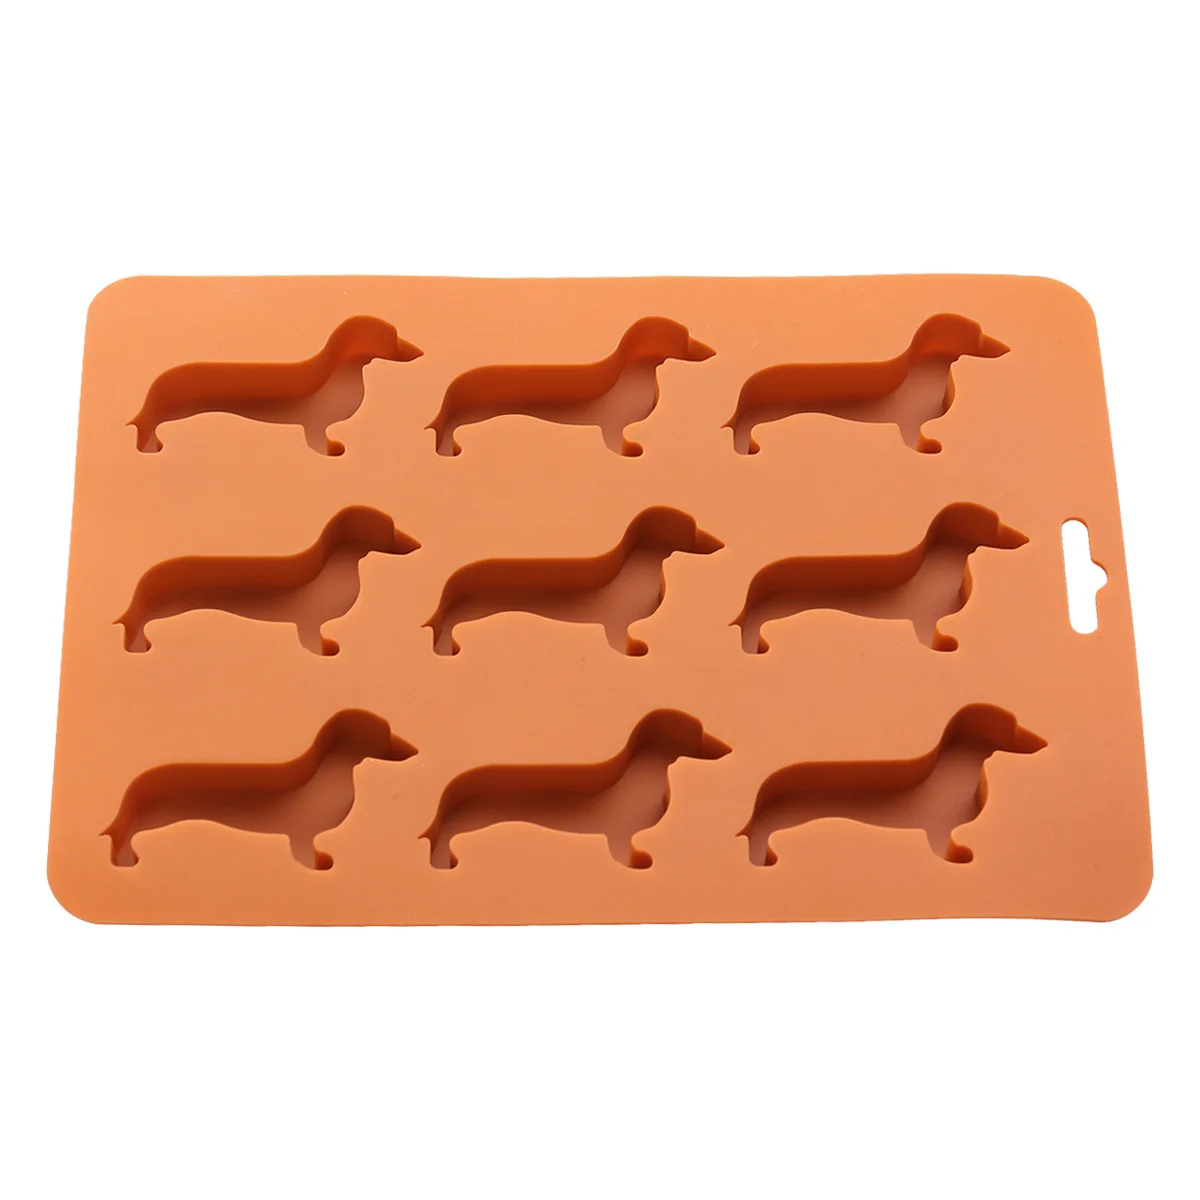 

Ice Cube Tray Molds Silicone Dog Dachshund Shaped Mold Baking Chocolate Puppy Candy Trayslid Small Cream Mini Pans Reusable